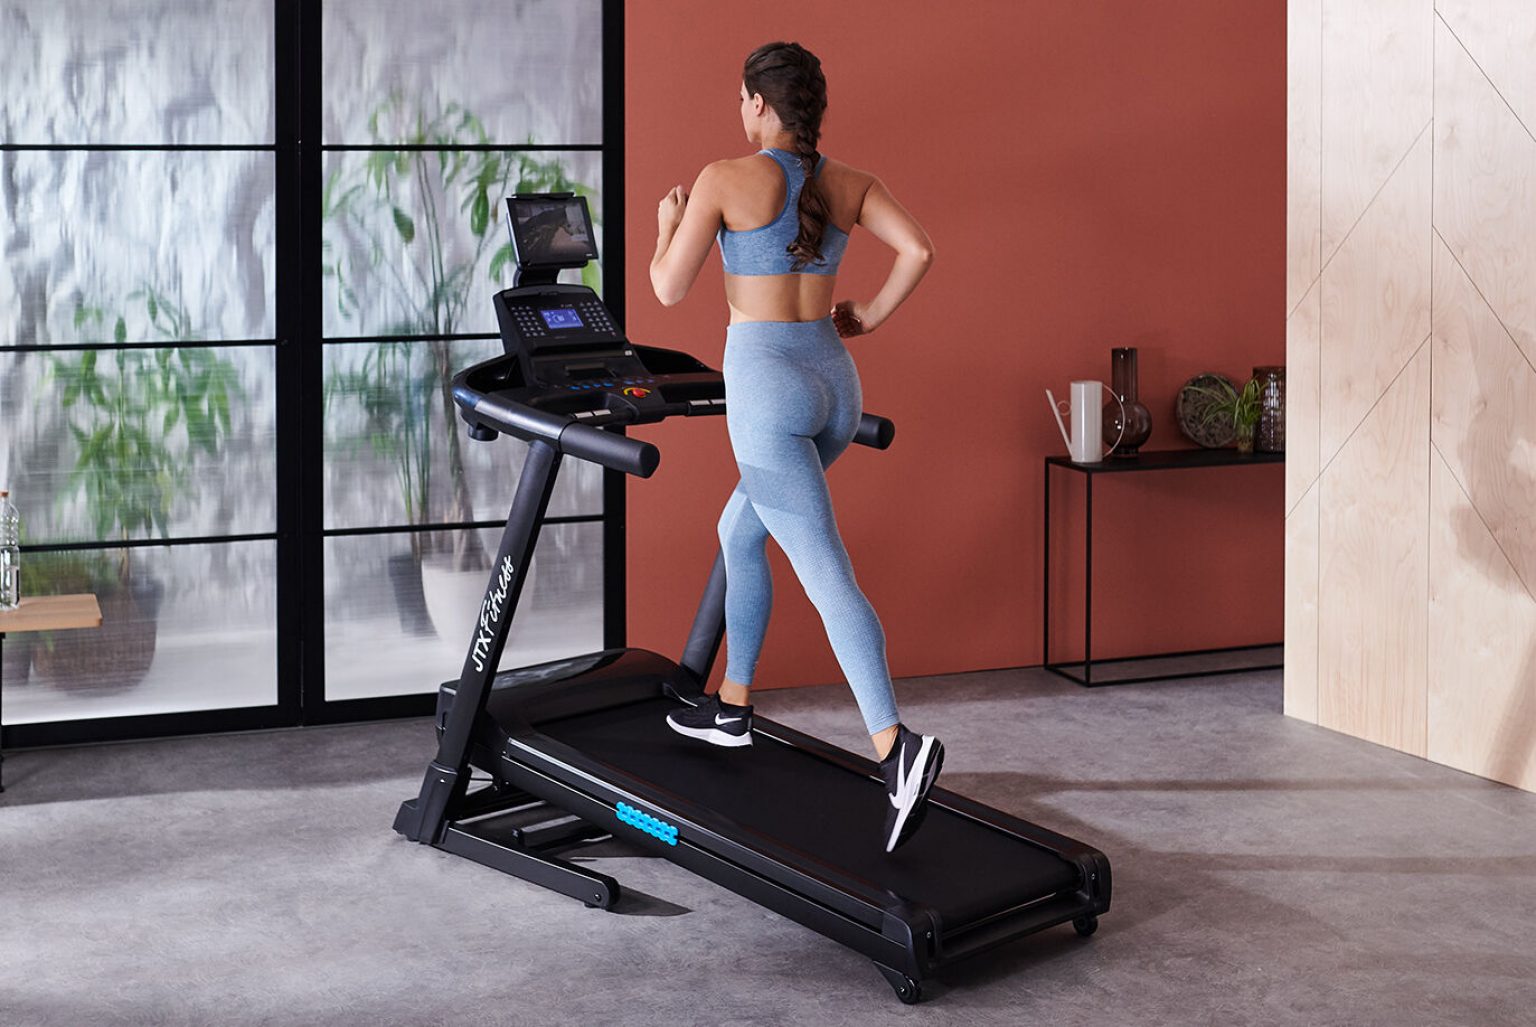 3 Best Incline Treadmill For Incline Training In 2021